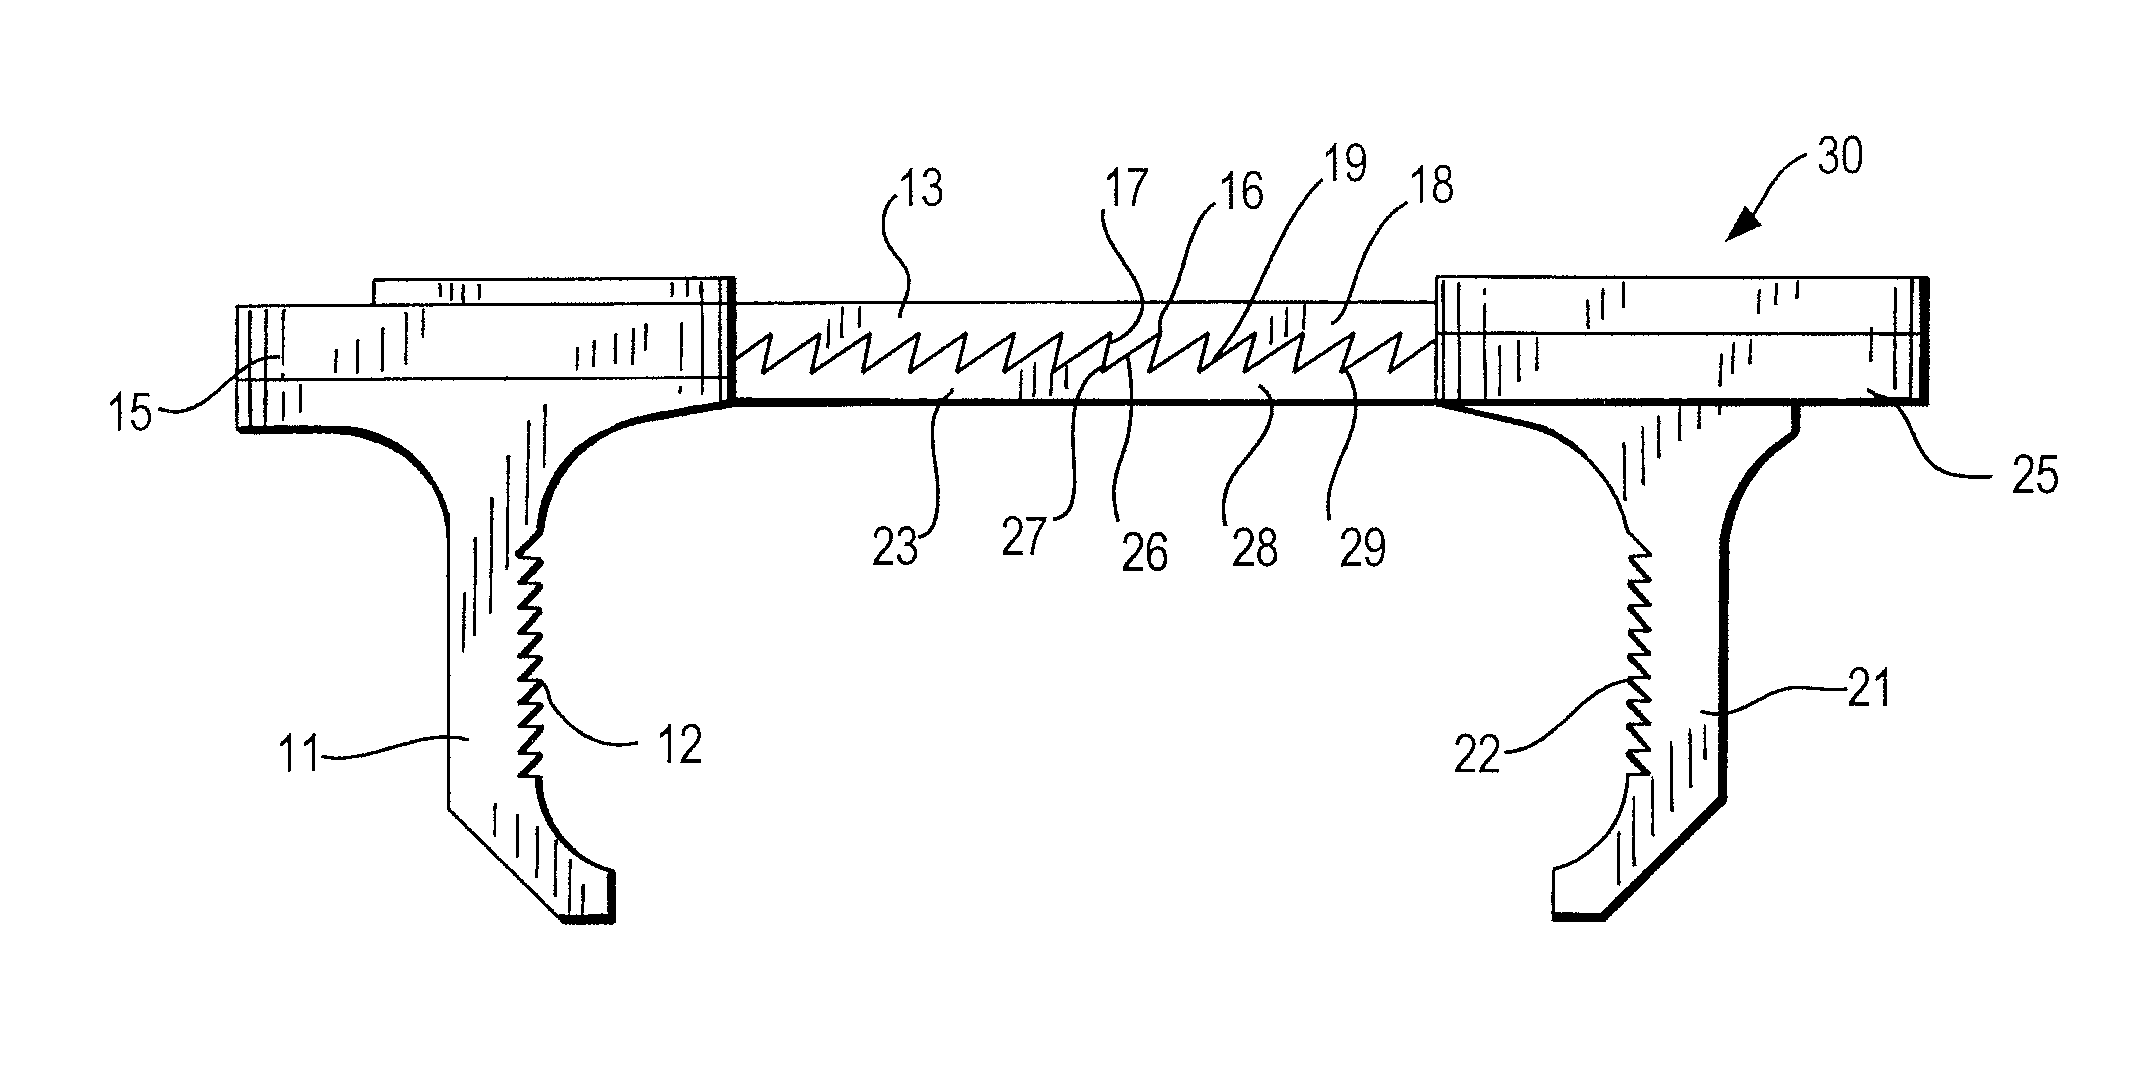 Method and apparatus for surgical clamping